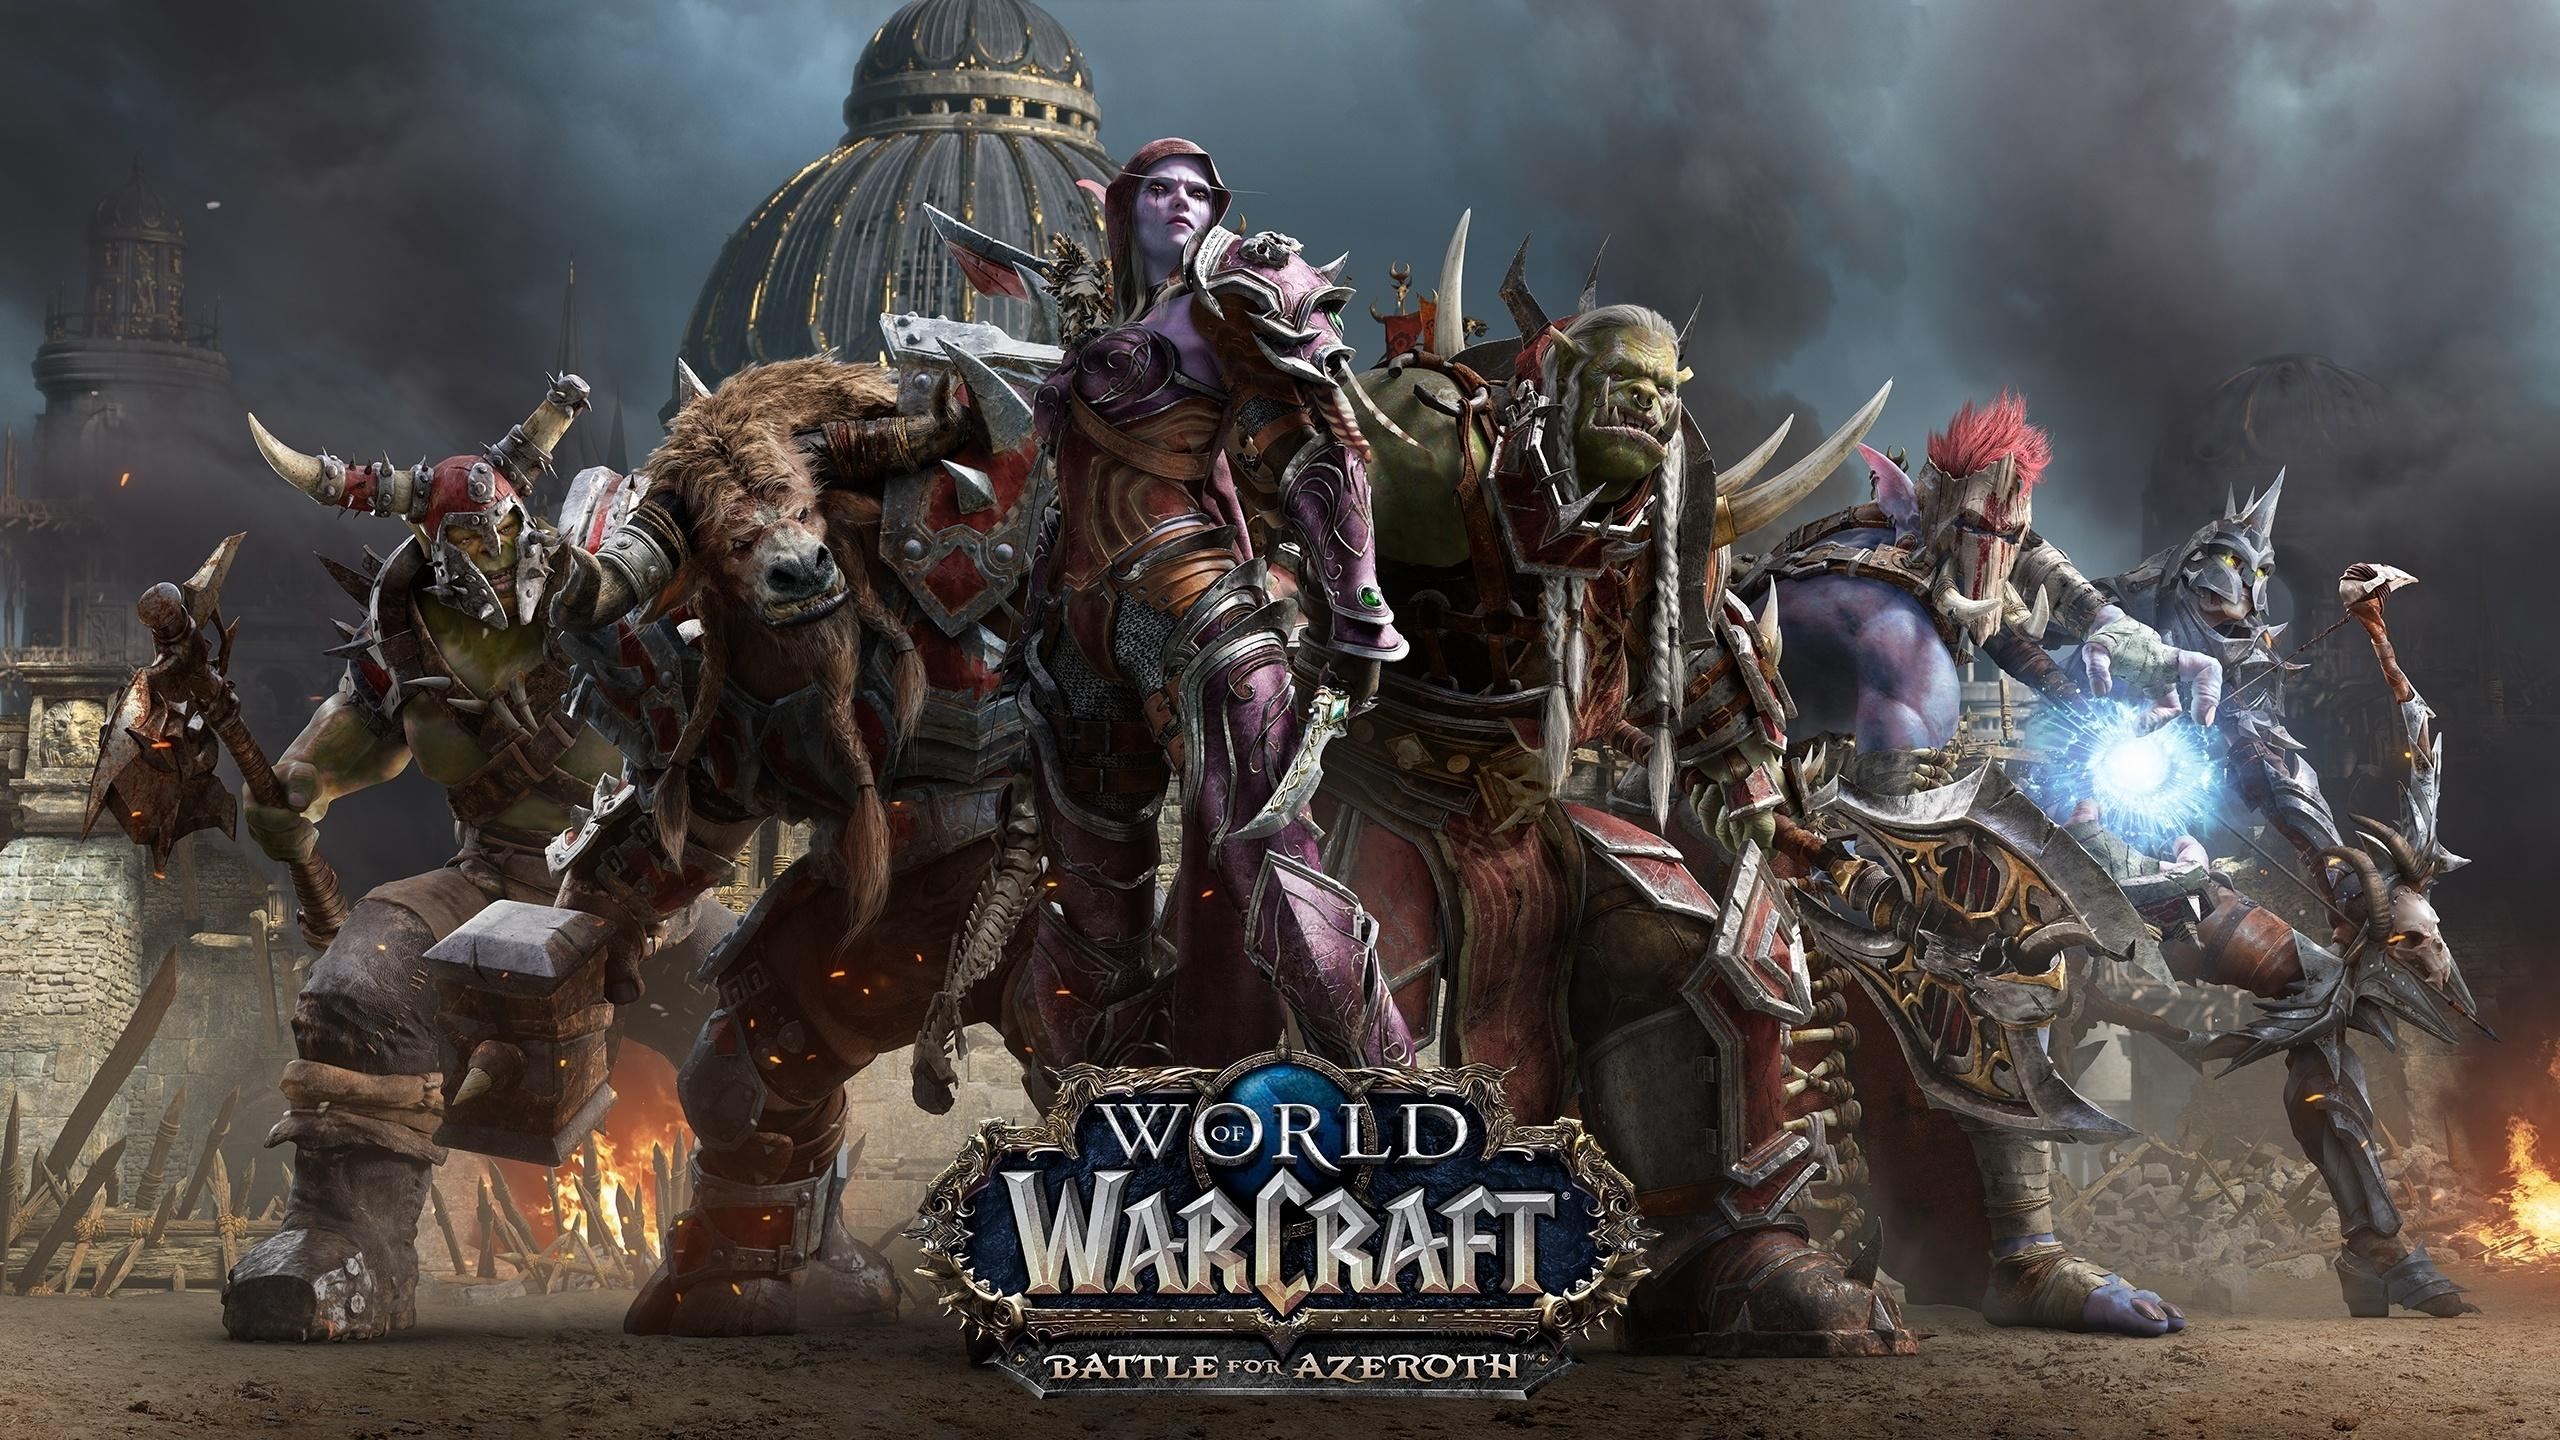 World of Warcraft: Battle For Azeroth